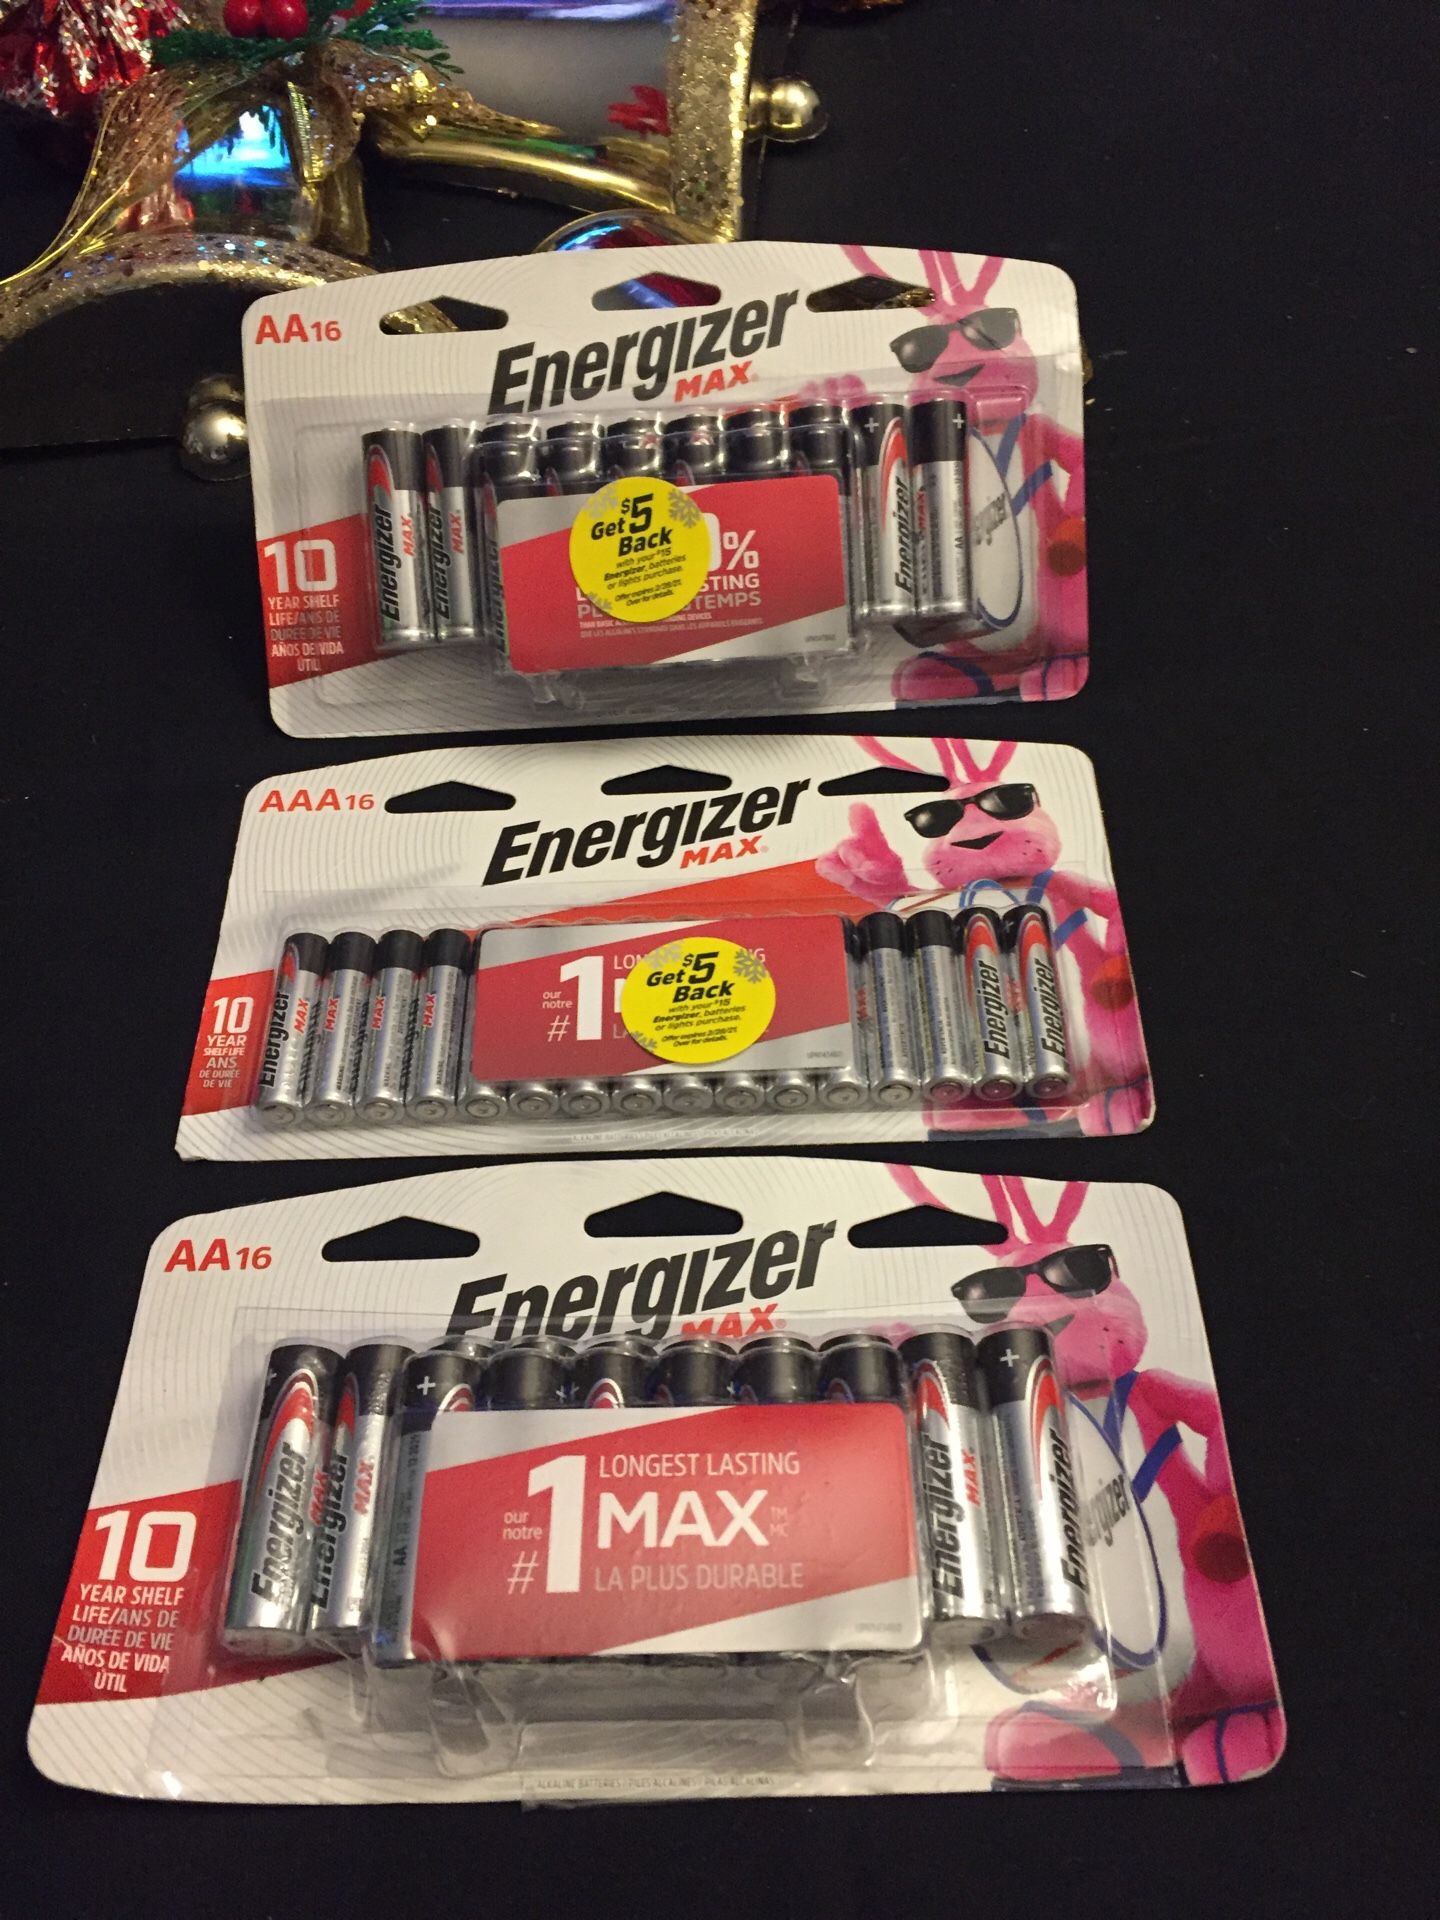 Asking $25 for all three get your holiday batteries here